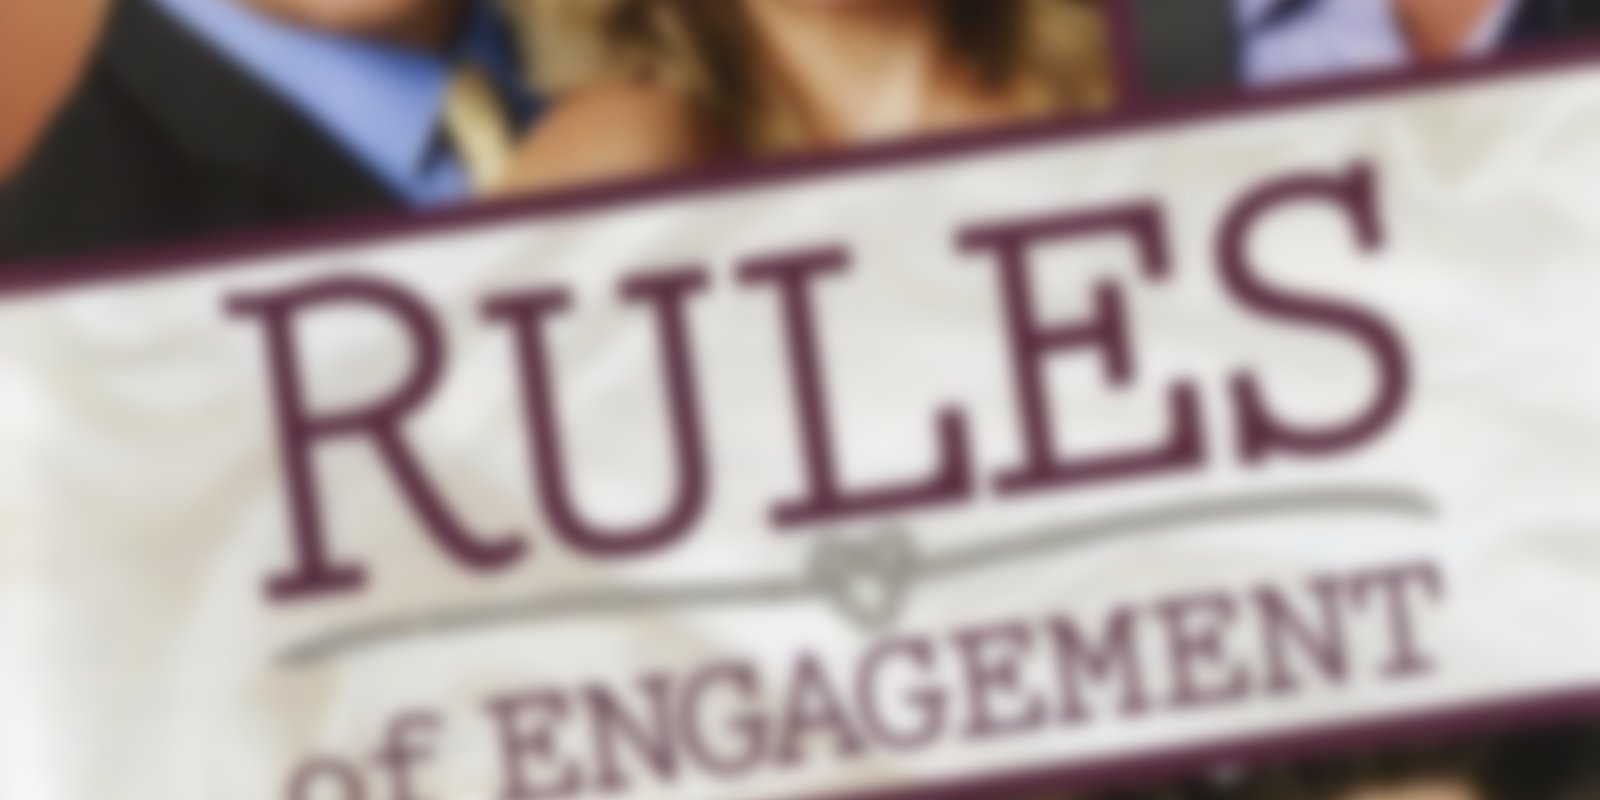 Rules of Engagement - Staffel 4